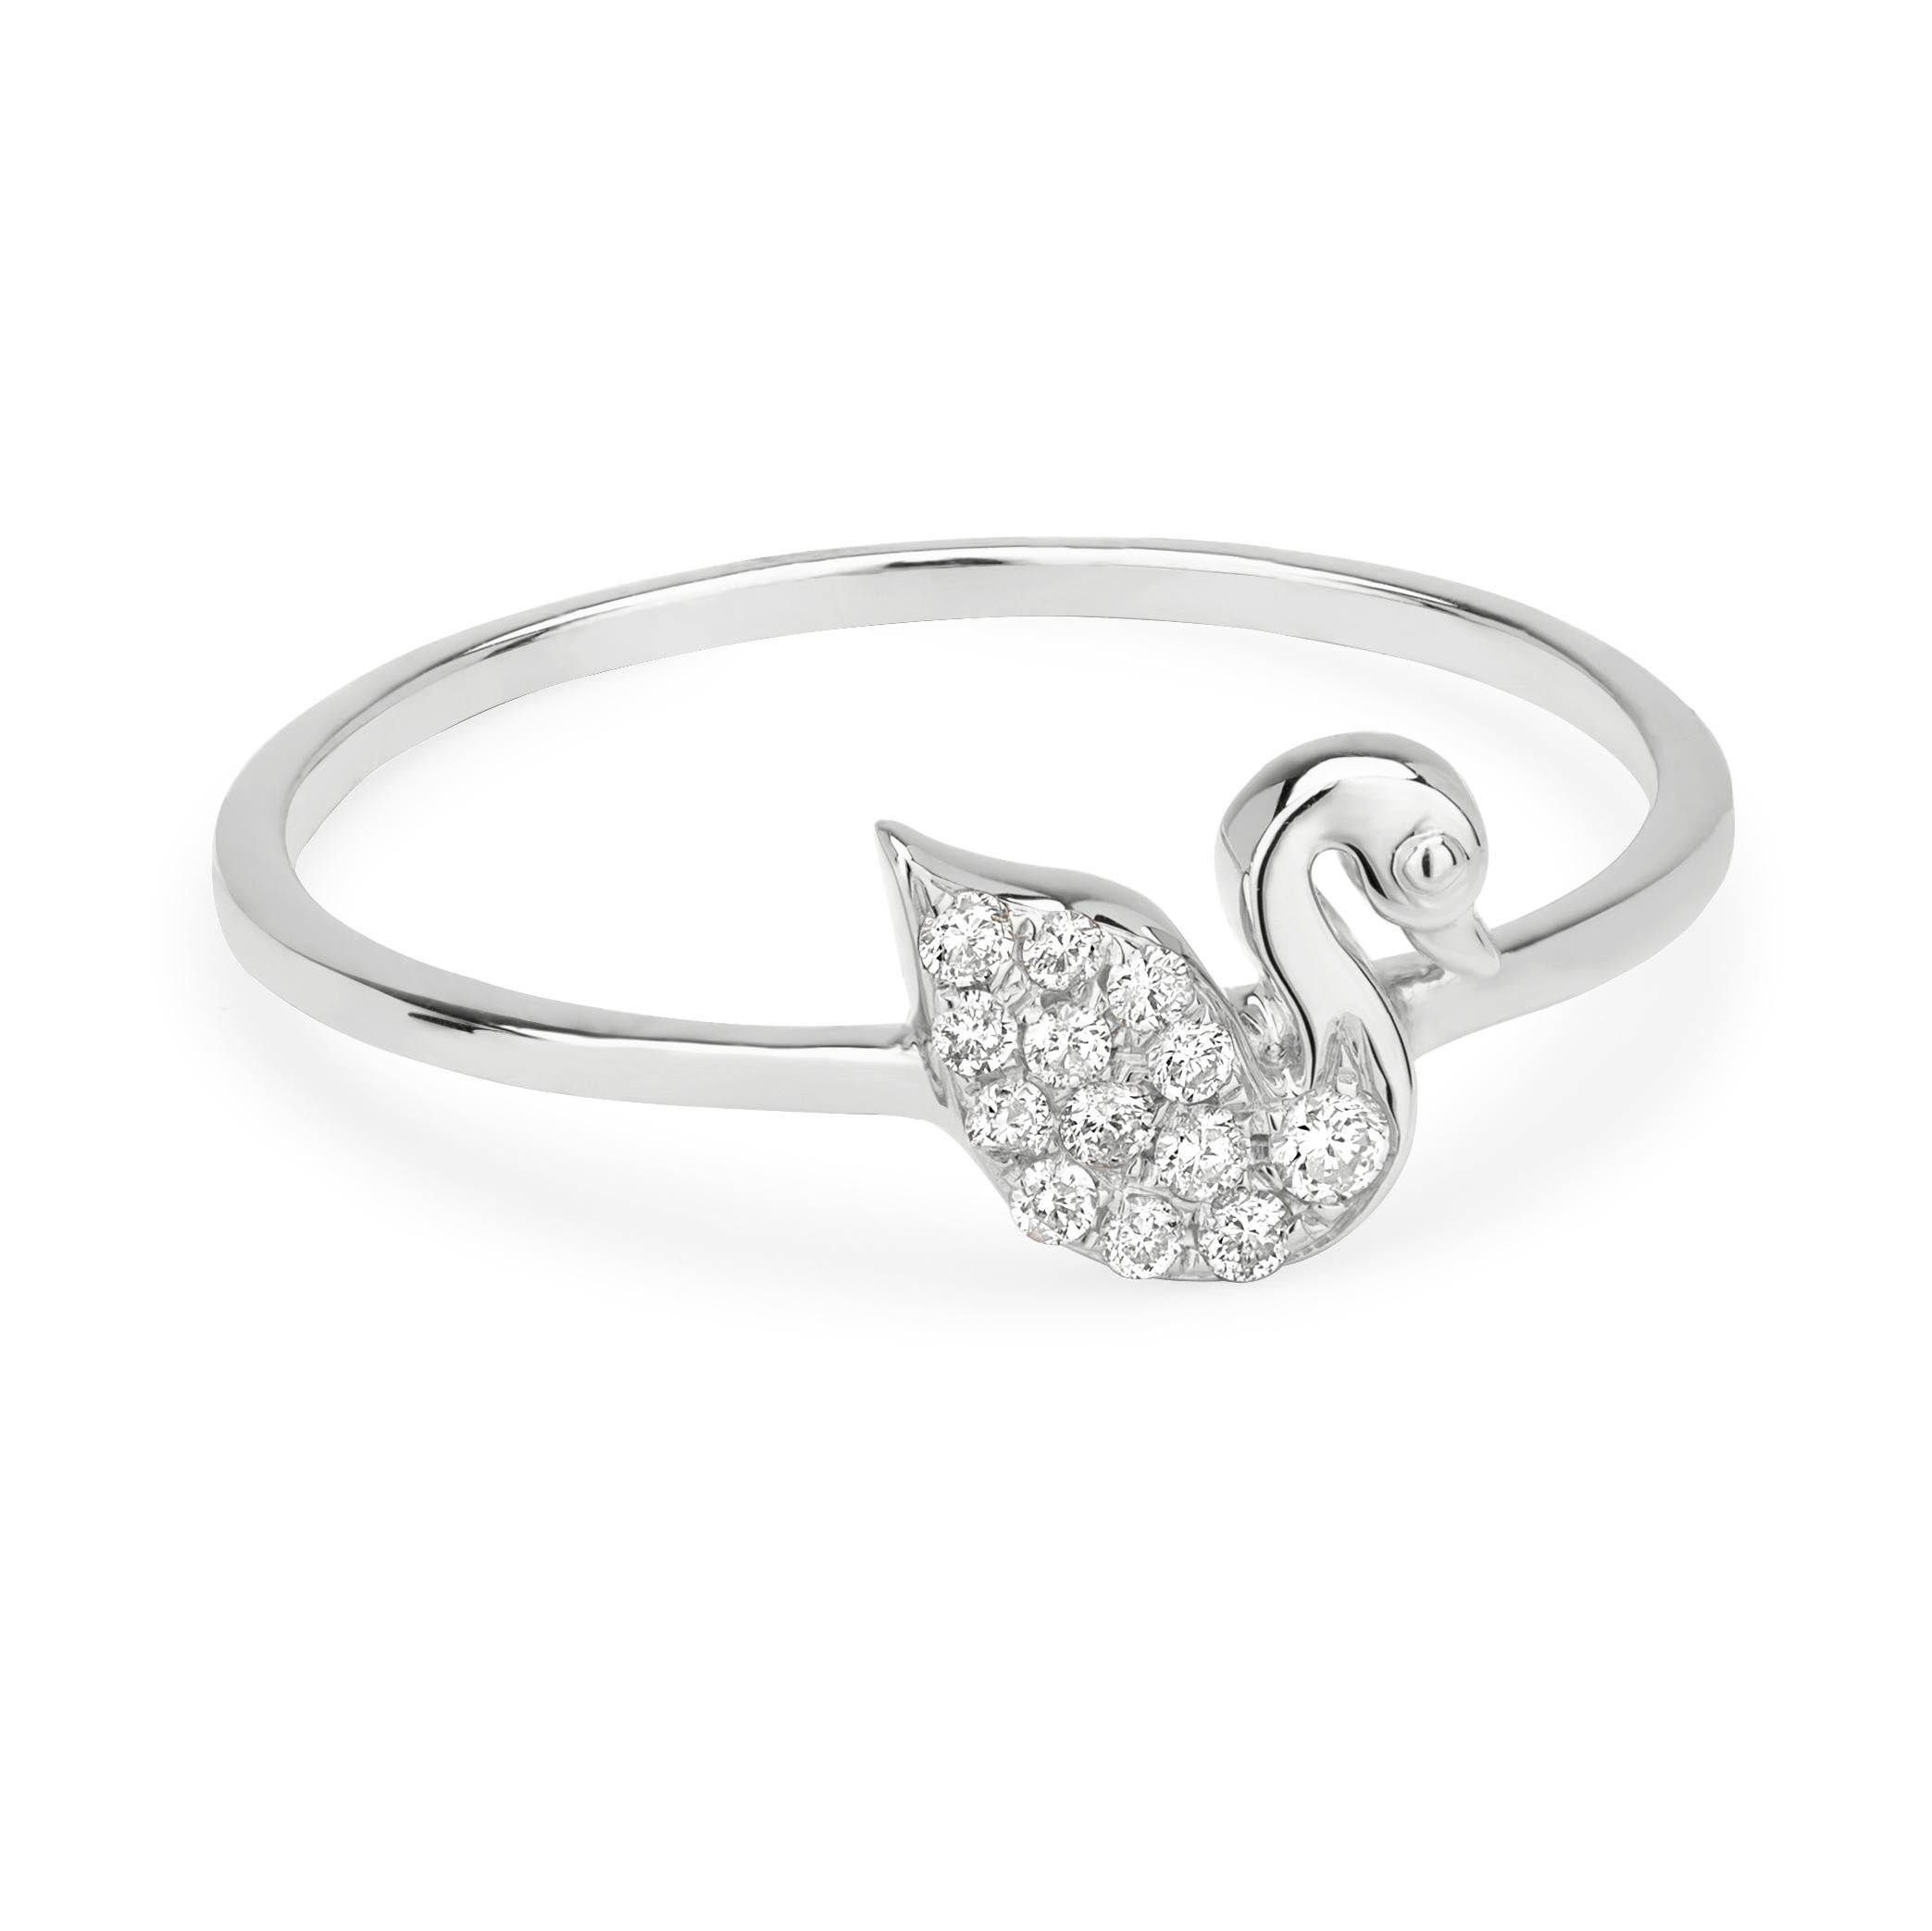 Grace your finger with a Luxle swan ring a symbol of fidelity and eternal love. Subtle yet pretty this swan ring is the new fashion statement. Featured with 13 round cut diamonds, totaling 0.10Cts, embellished in a beautifully crafted motif of swan